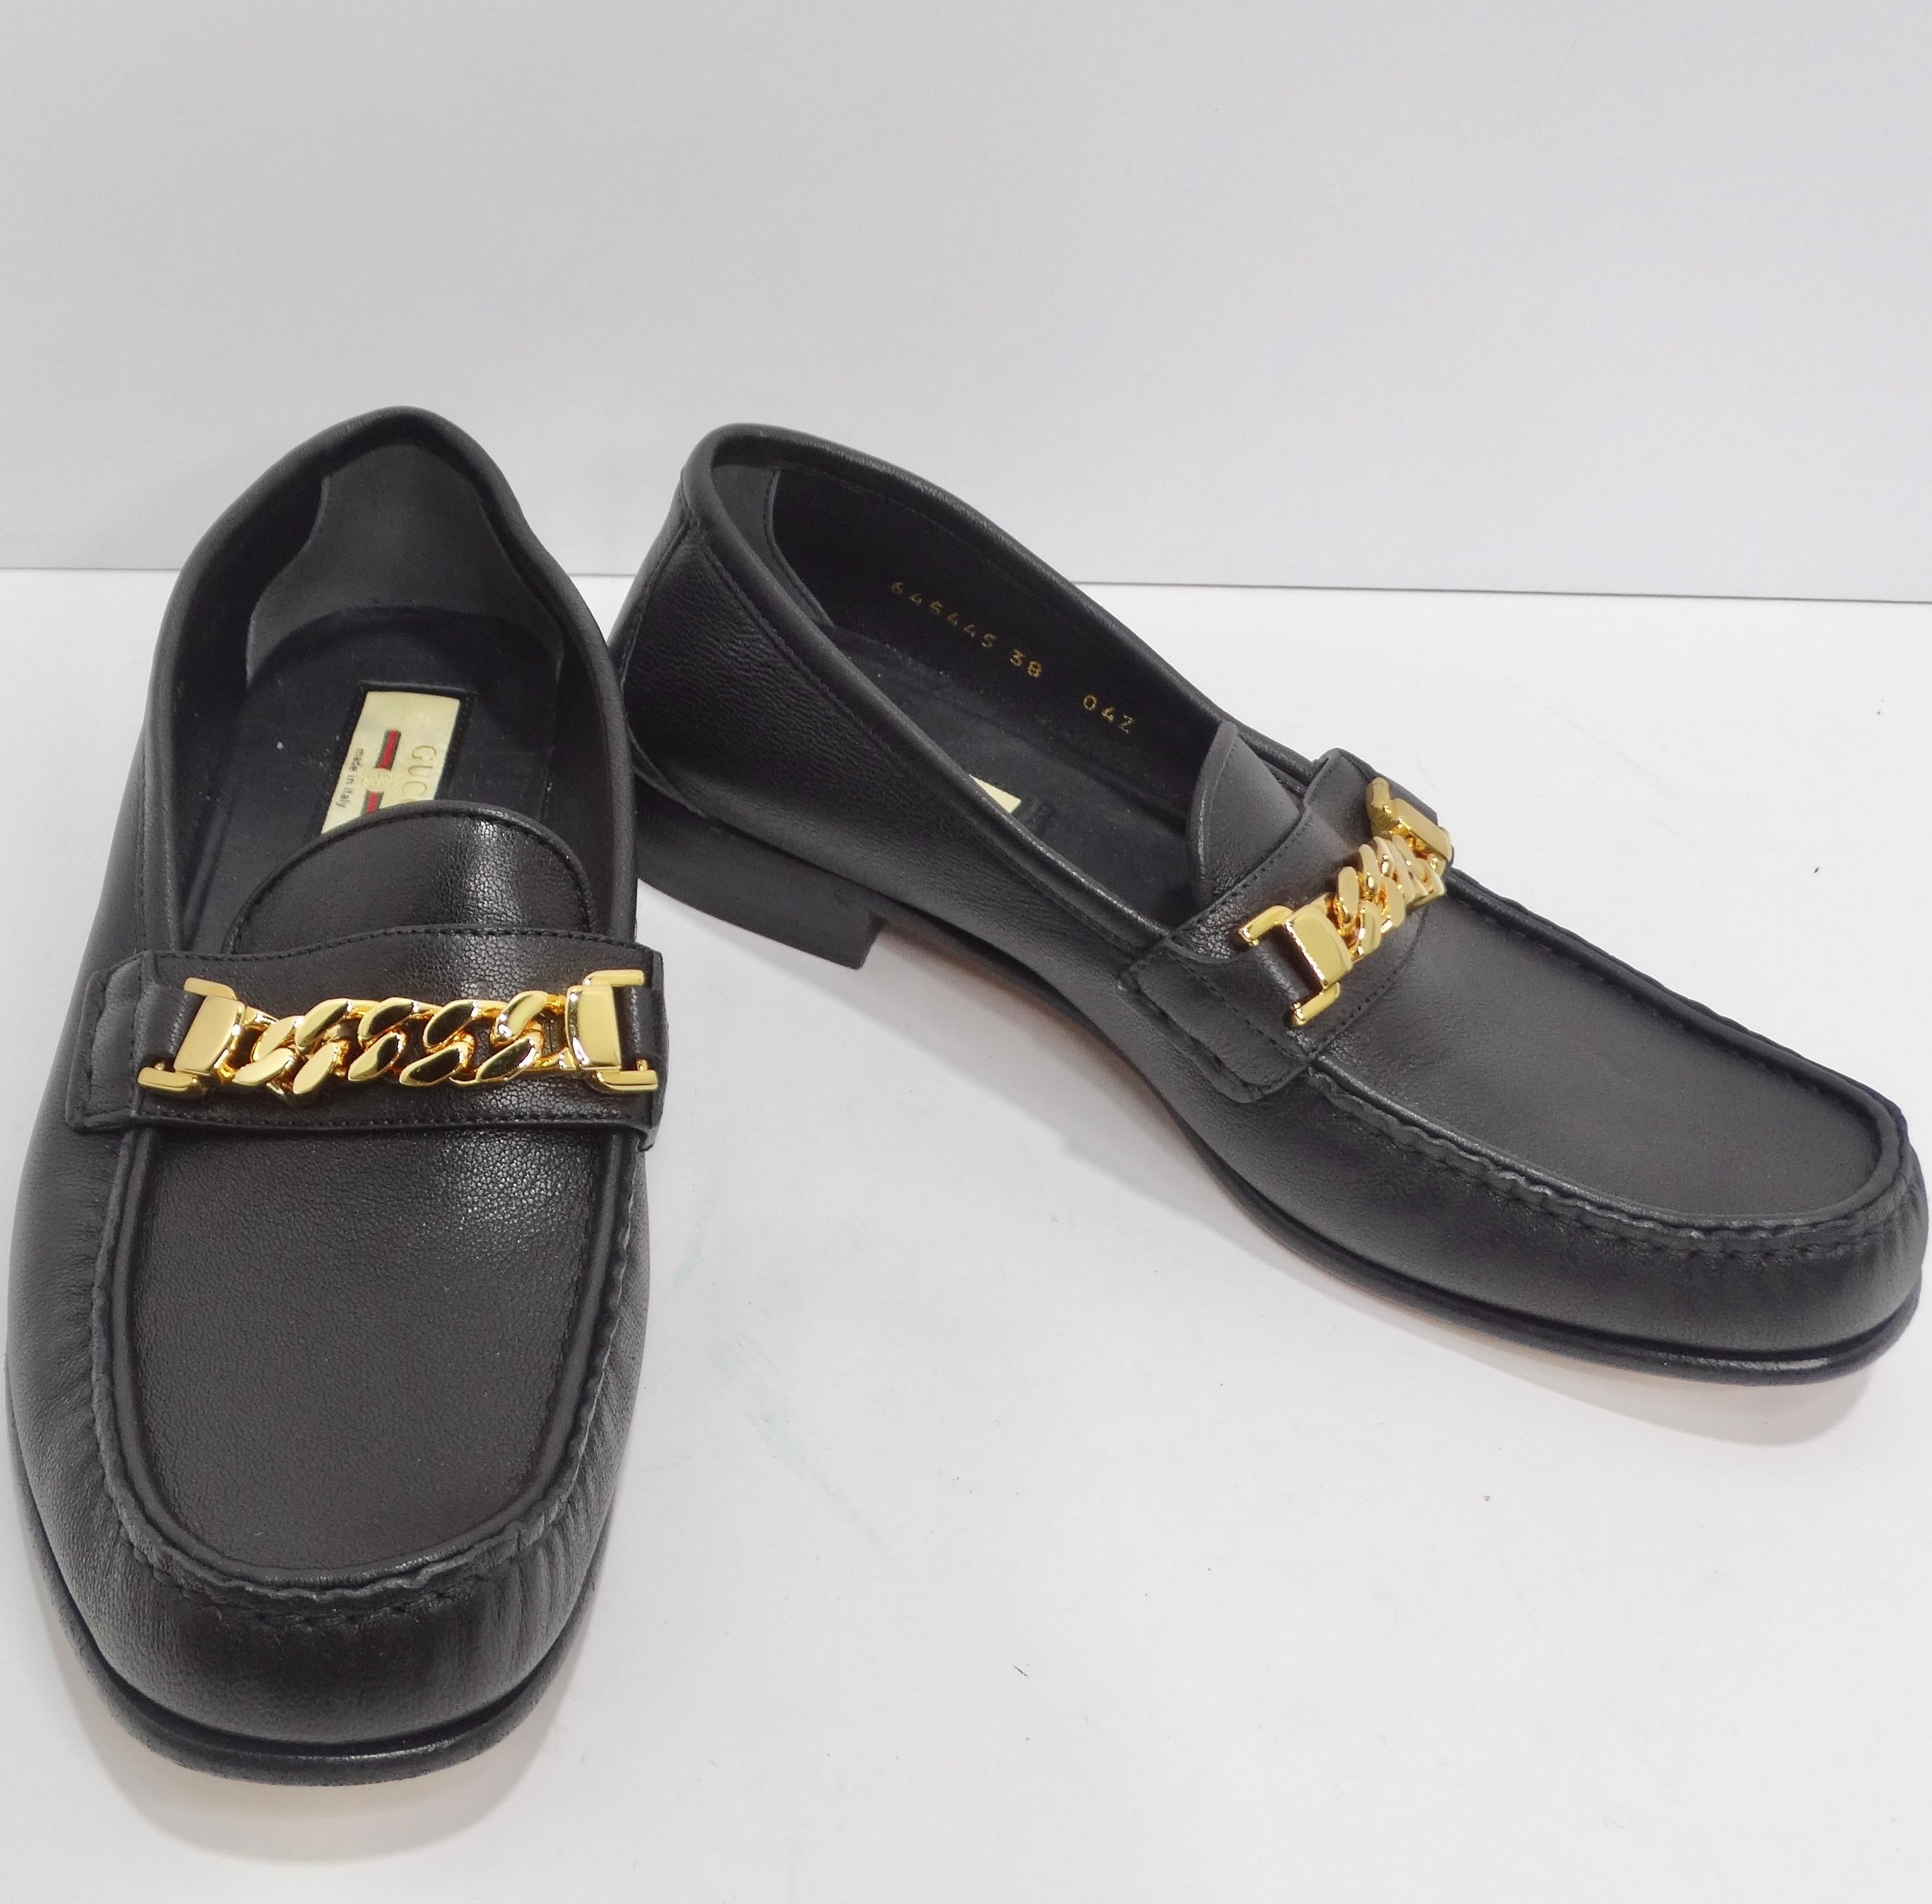 Gucci Sylvie Gold Tone Chain Loafers Black Leather In Good Condition For Sale In Scottsdale, AZ